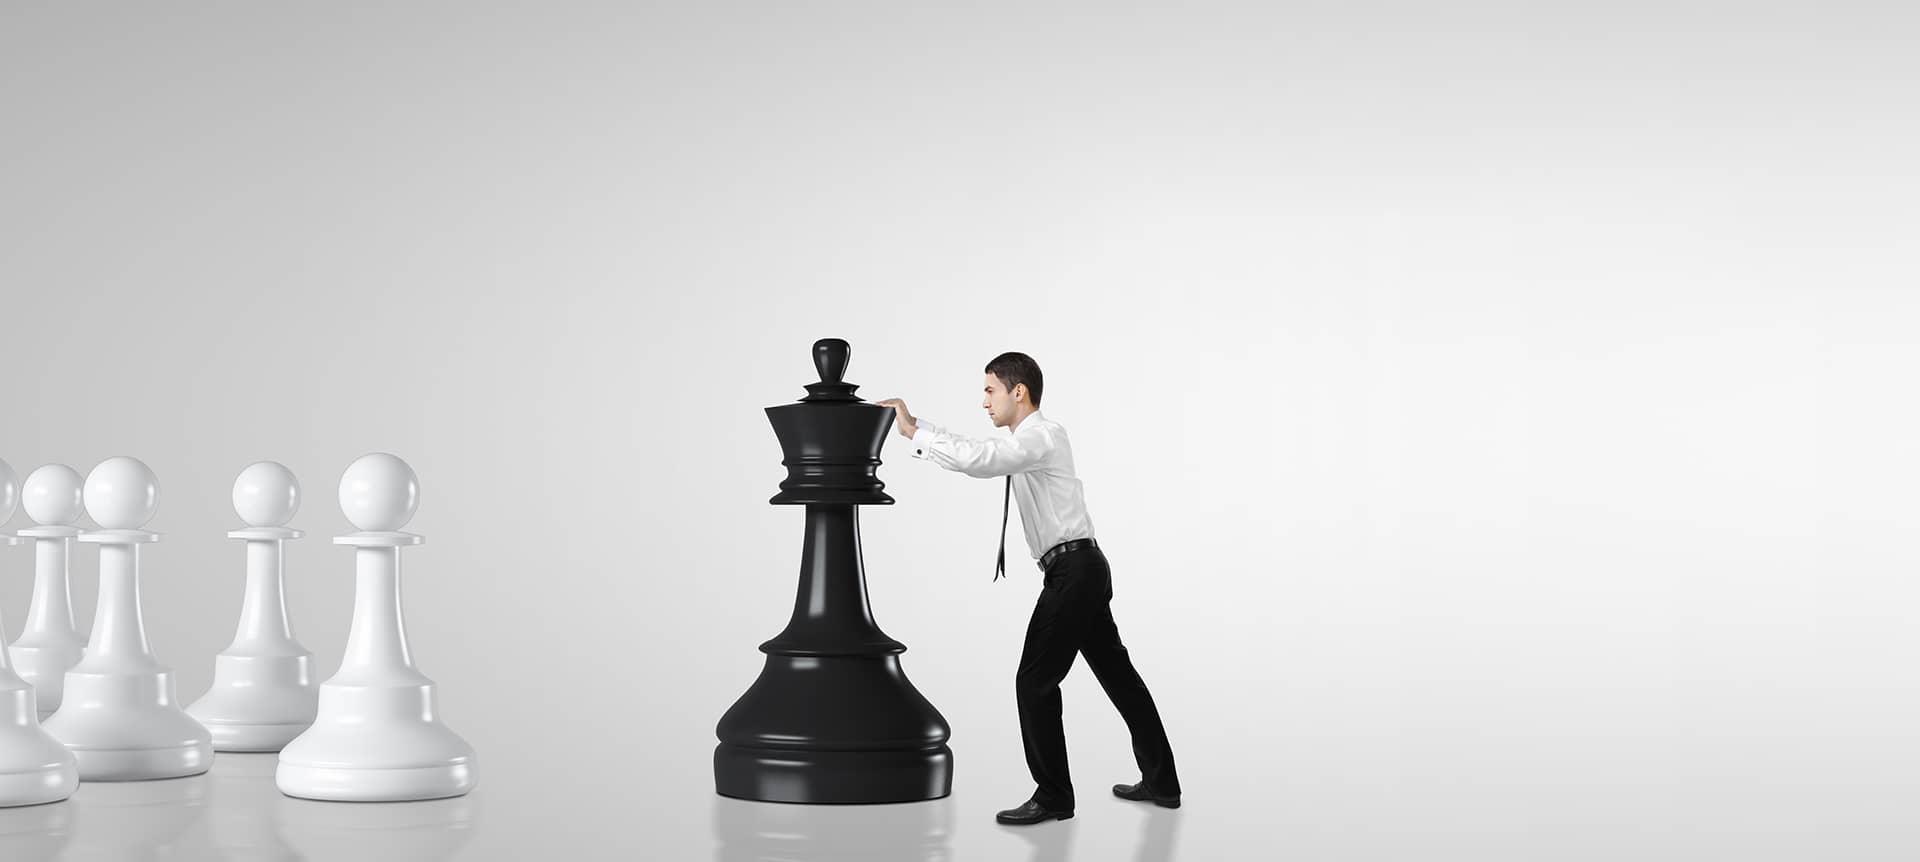 An employee pushing a huge chess piece, symbolizing trying to avoid a failing assessment process.